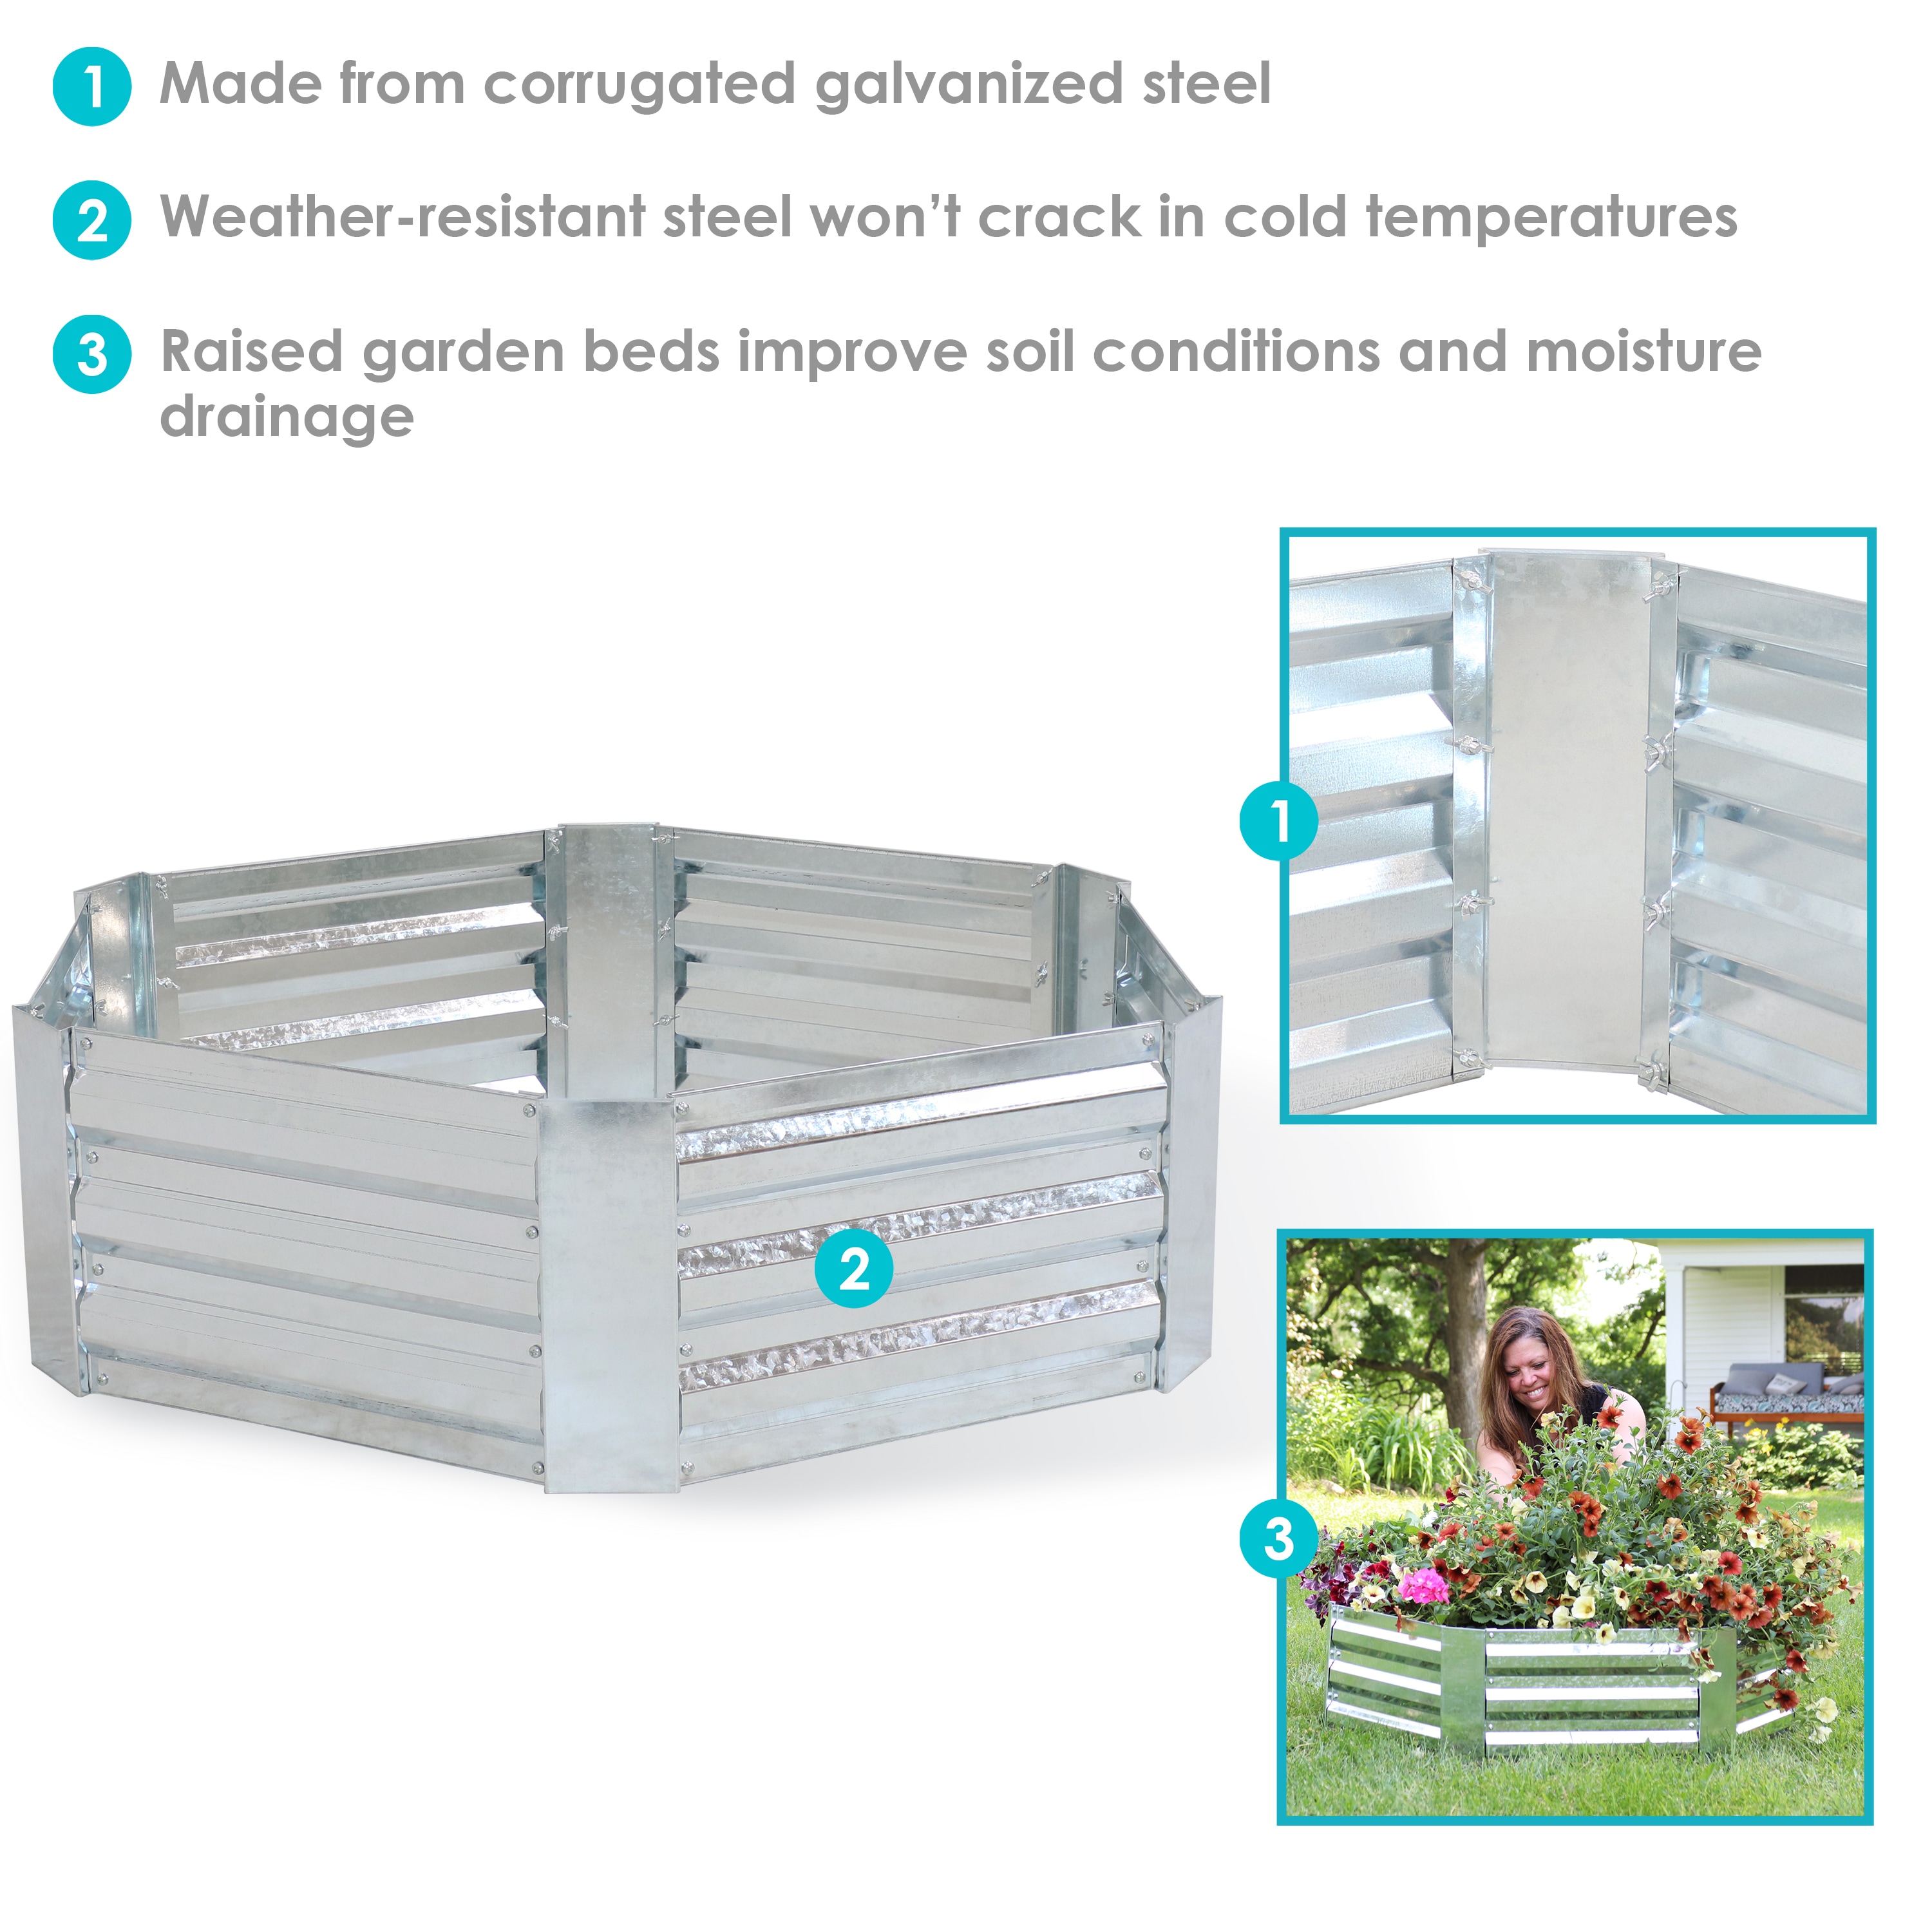 Vegetables Silver and Flowers 47.5-Inch x 11.75-Inch Rectangle Planter for Plants Sunnydaze Raised Metal Garden Bed Corrugated Galvanized Steel 